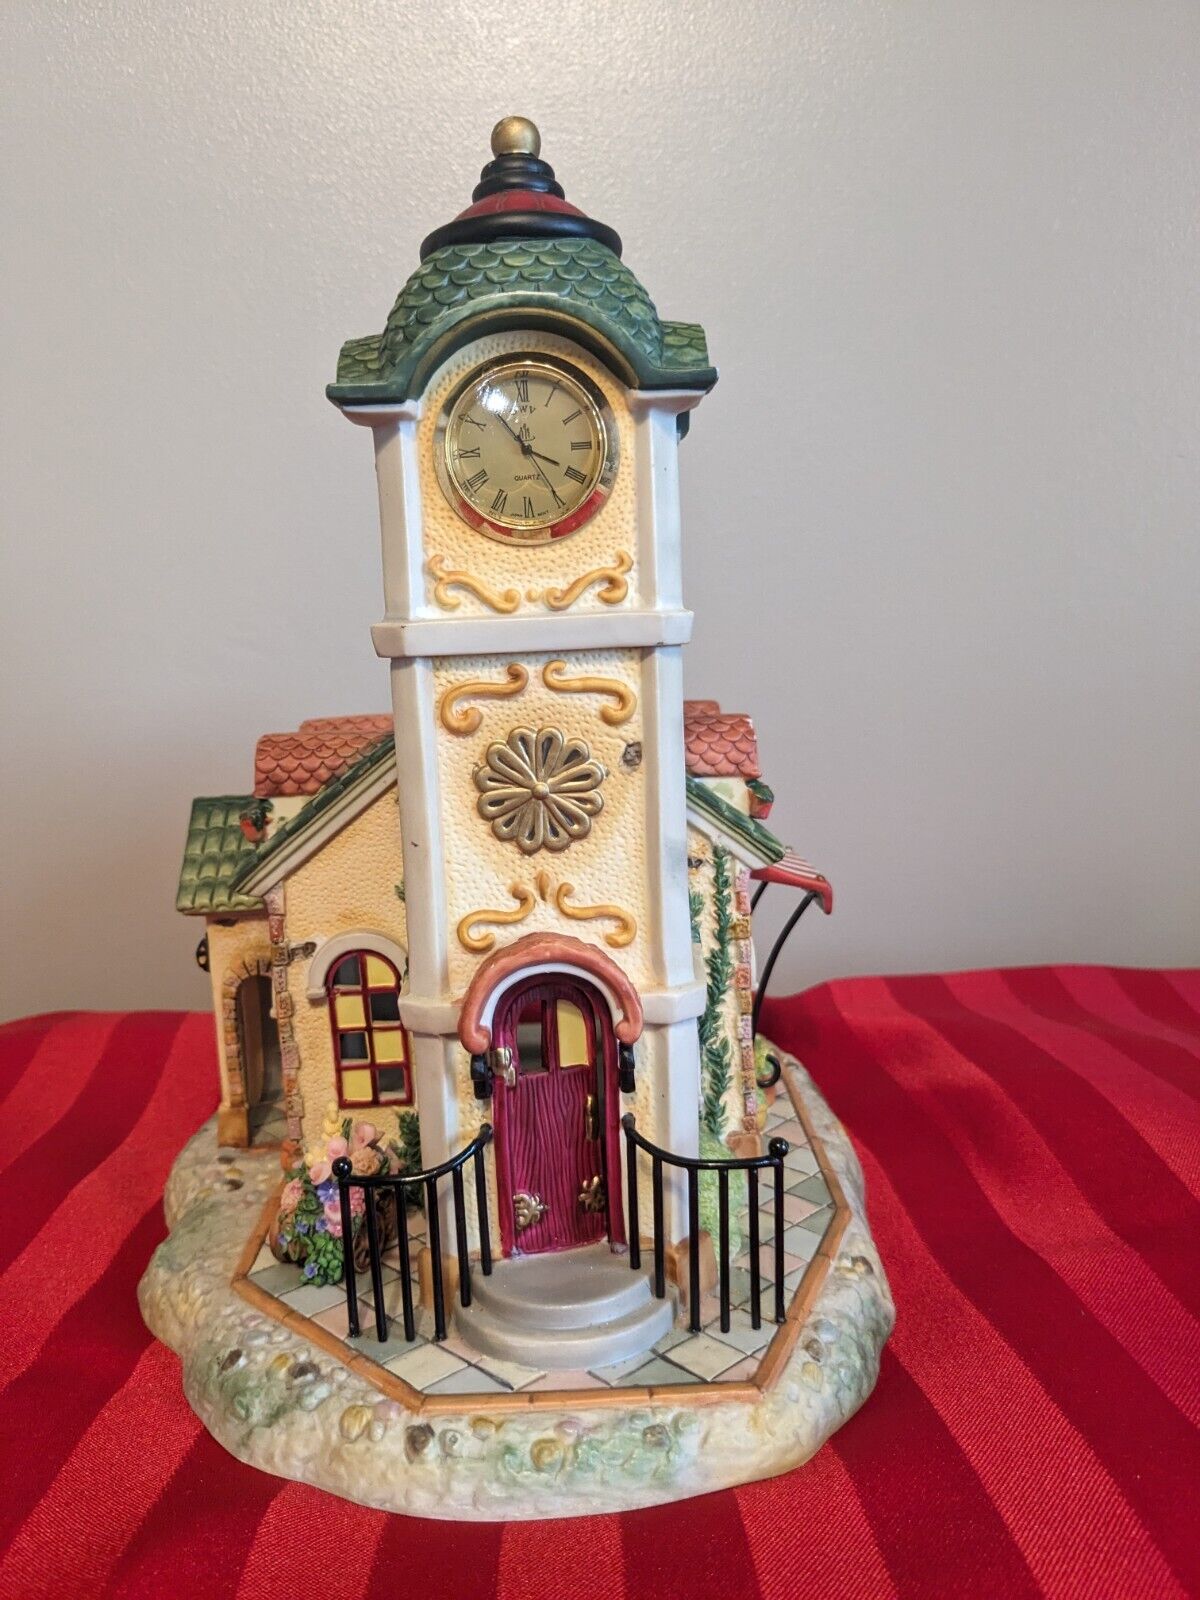 PartyLite Olde World Village Clocktower Collectible Candle Tealight